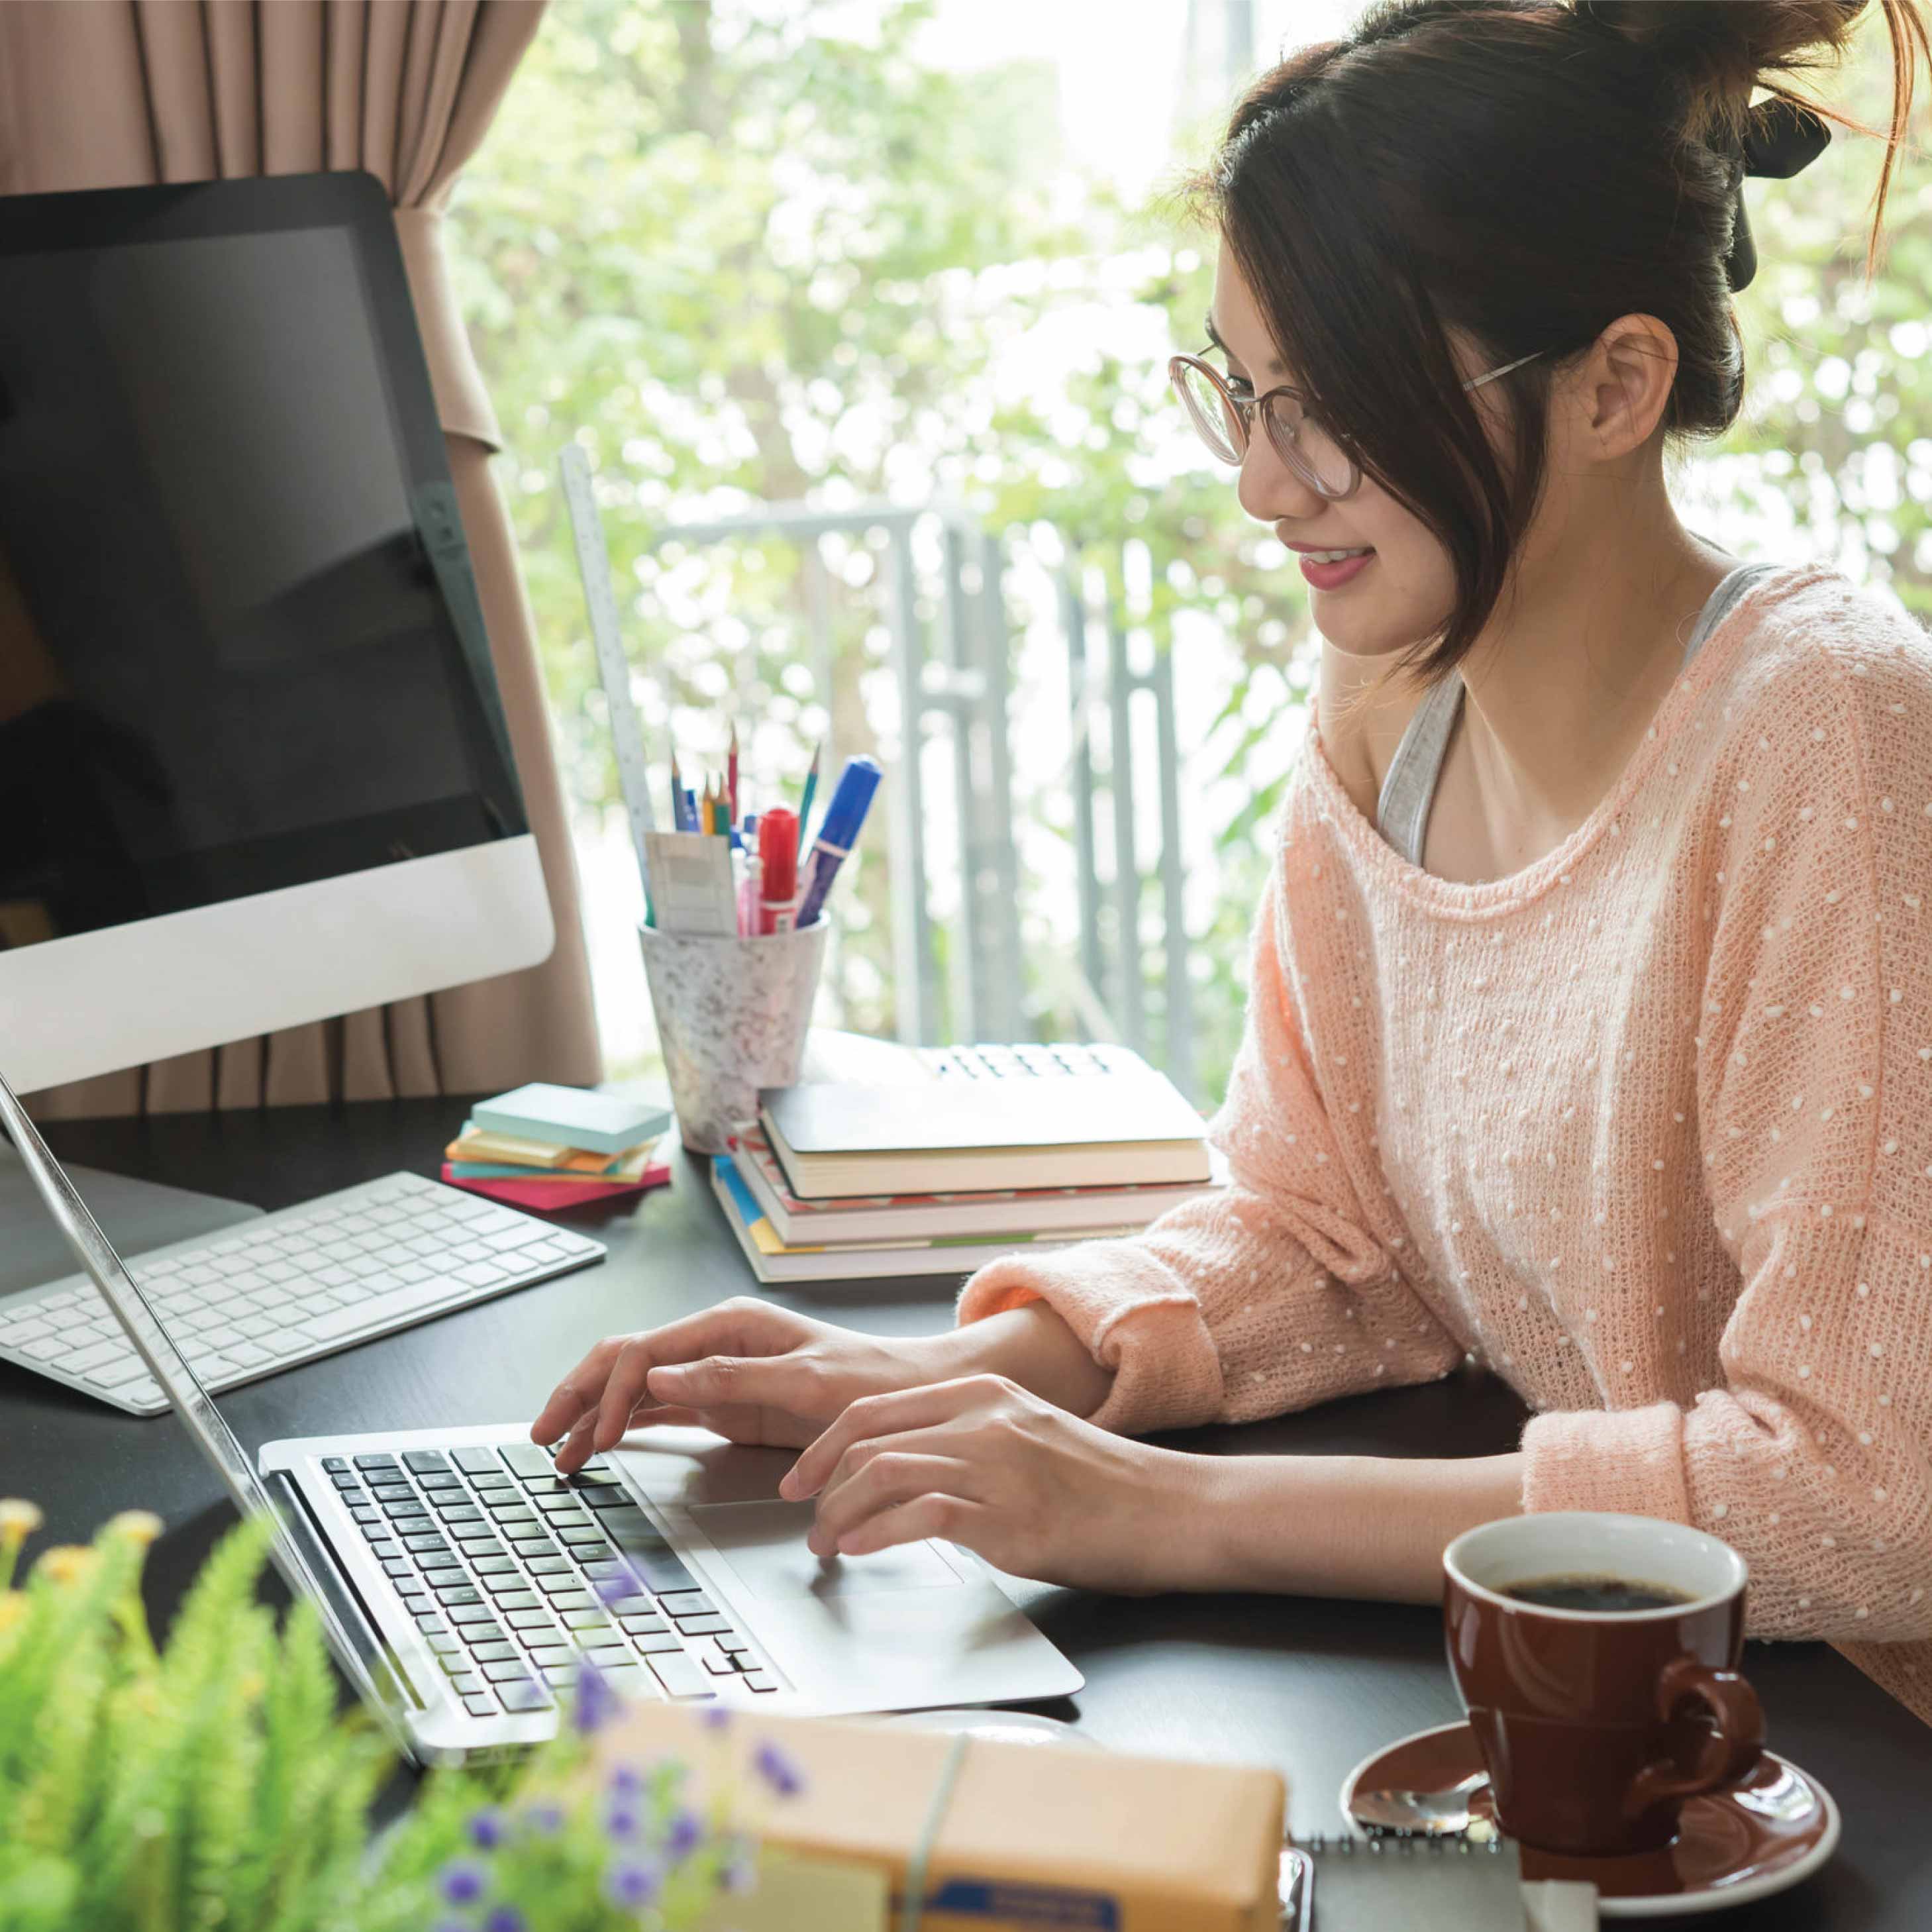 Working From Home Tips to Stay Productive